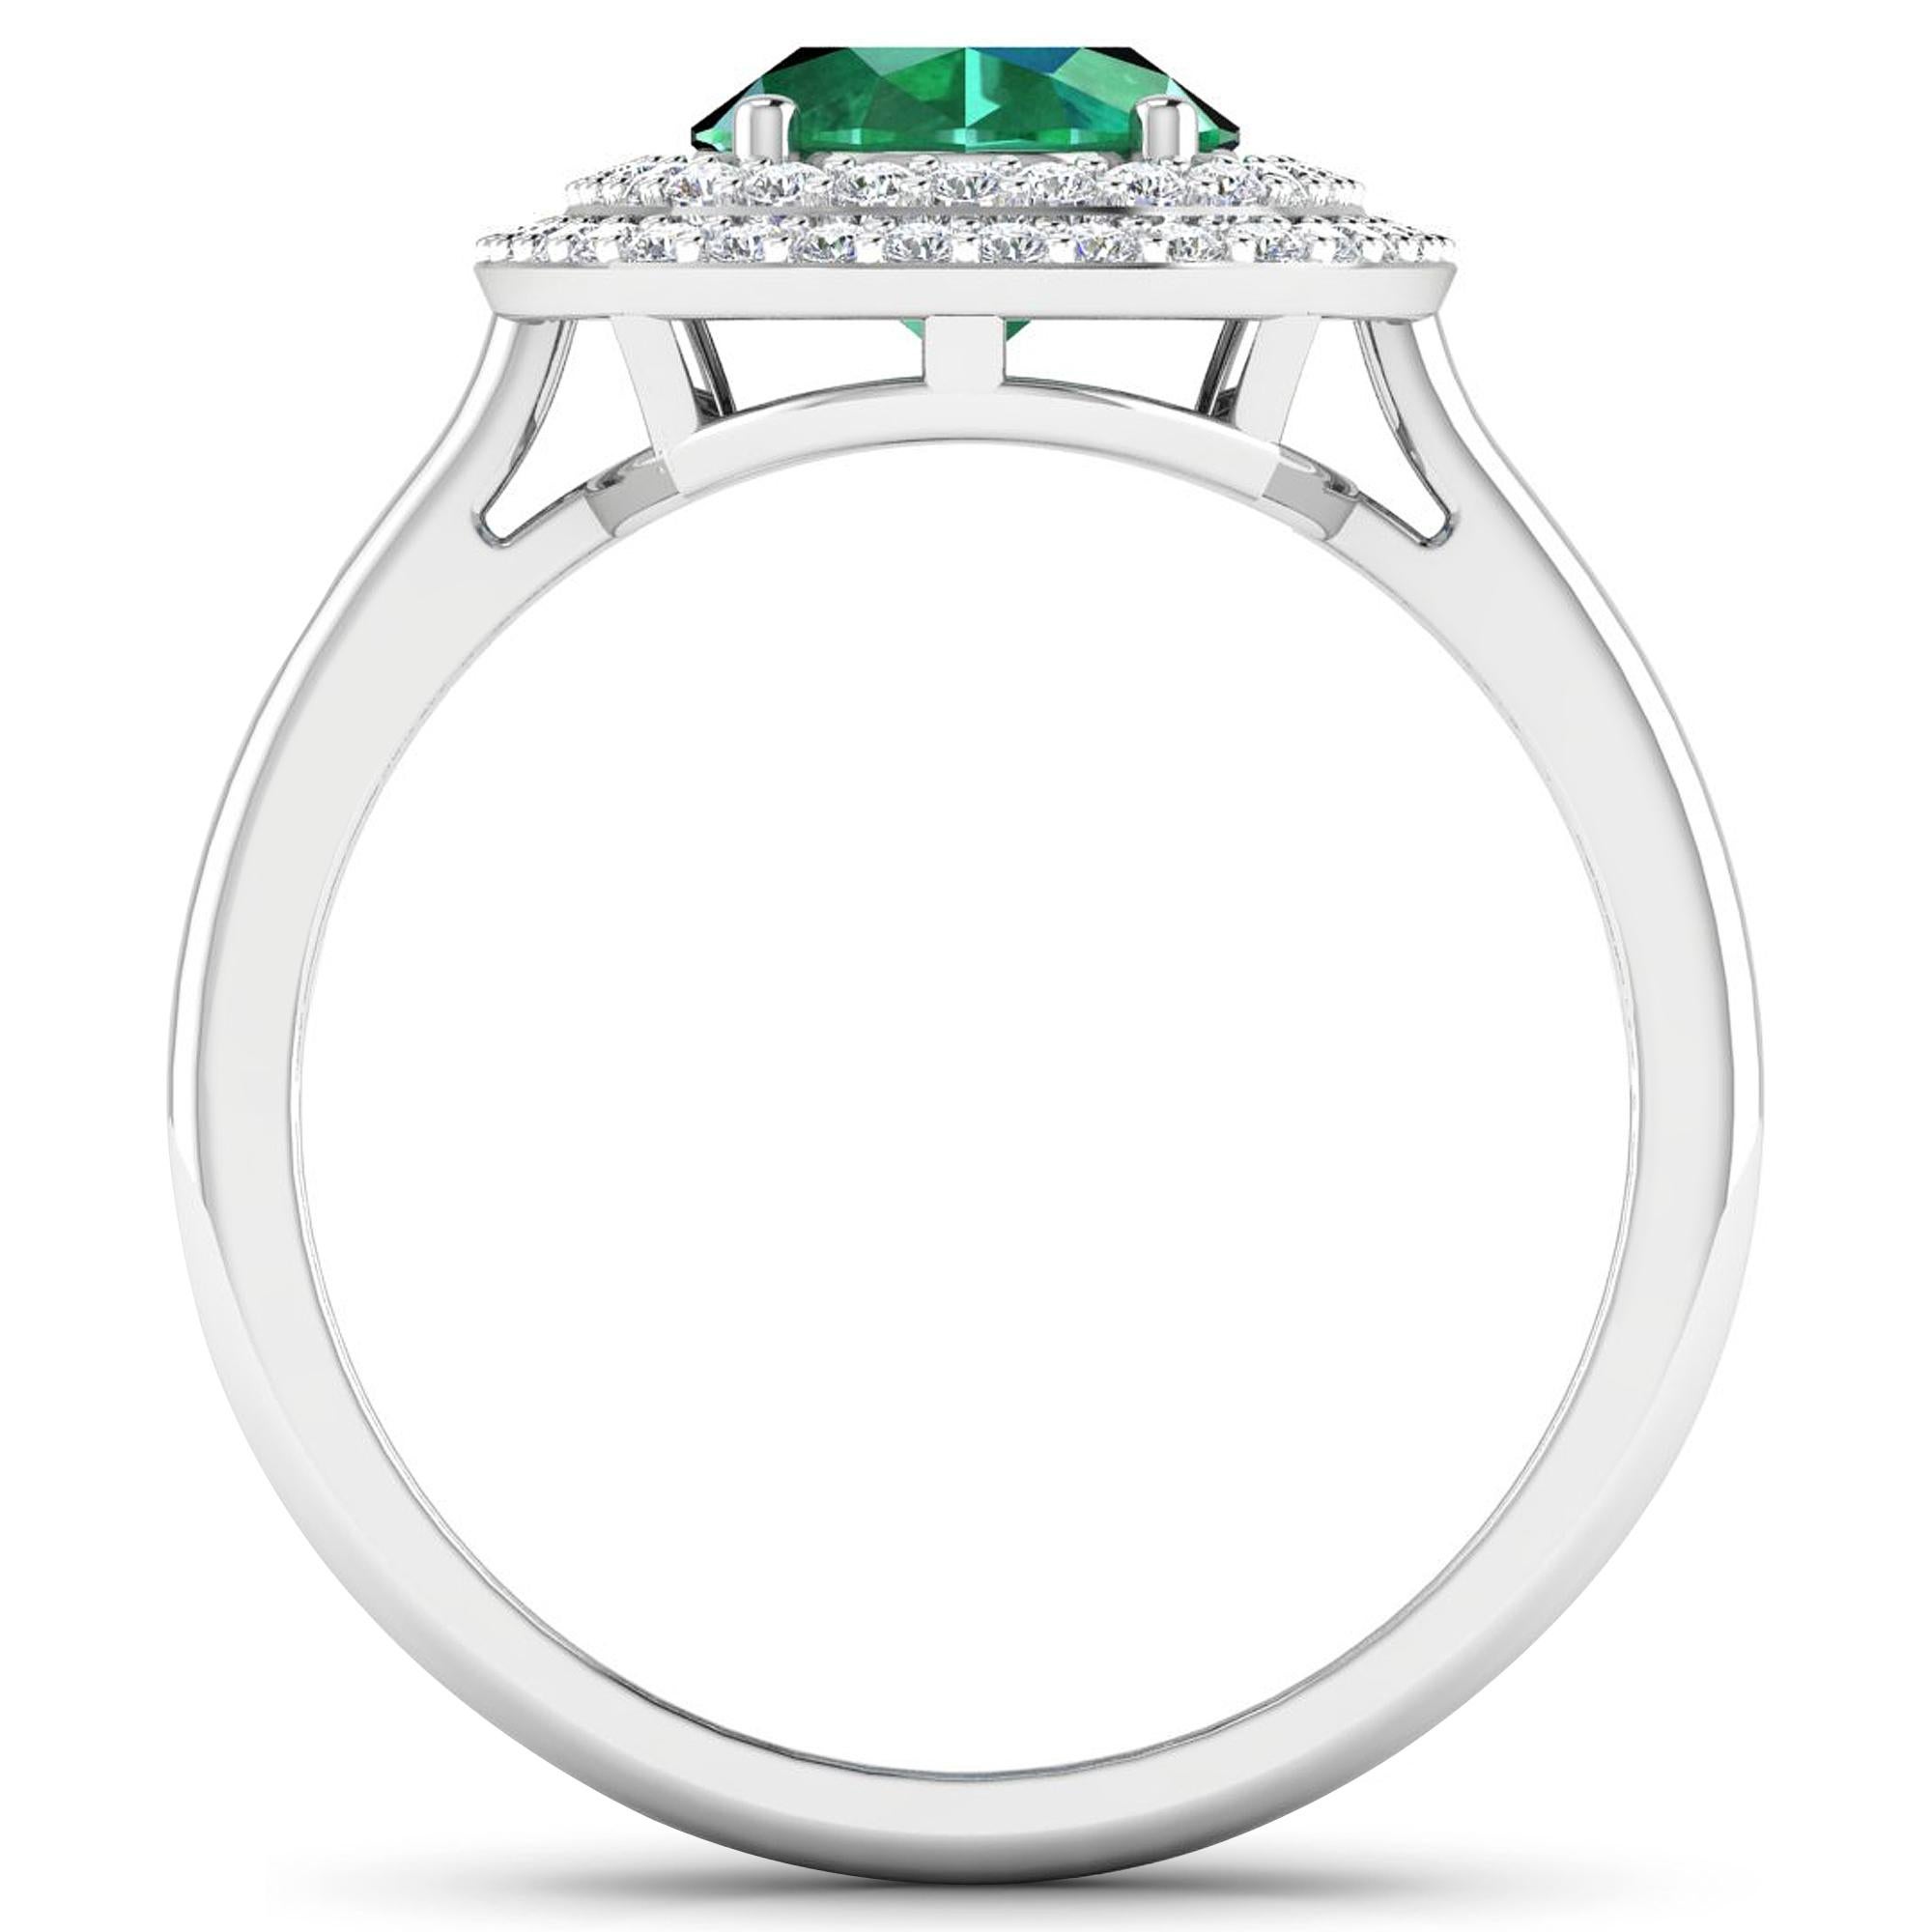 Emerald Gold Ring, 14Kt Gold Emerald & Diamond Engagement Ring, 1.93ctw.

Flaunt yourself with this 14K White Gold Emerald & White Diamond Engagement Ring. The setting is inlaid with 62 accented full-cut White Diamond round stones for a total stone